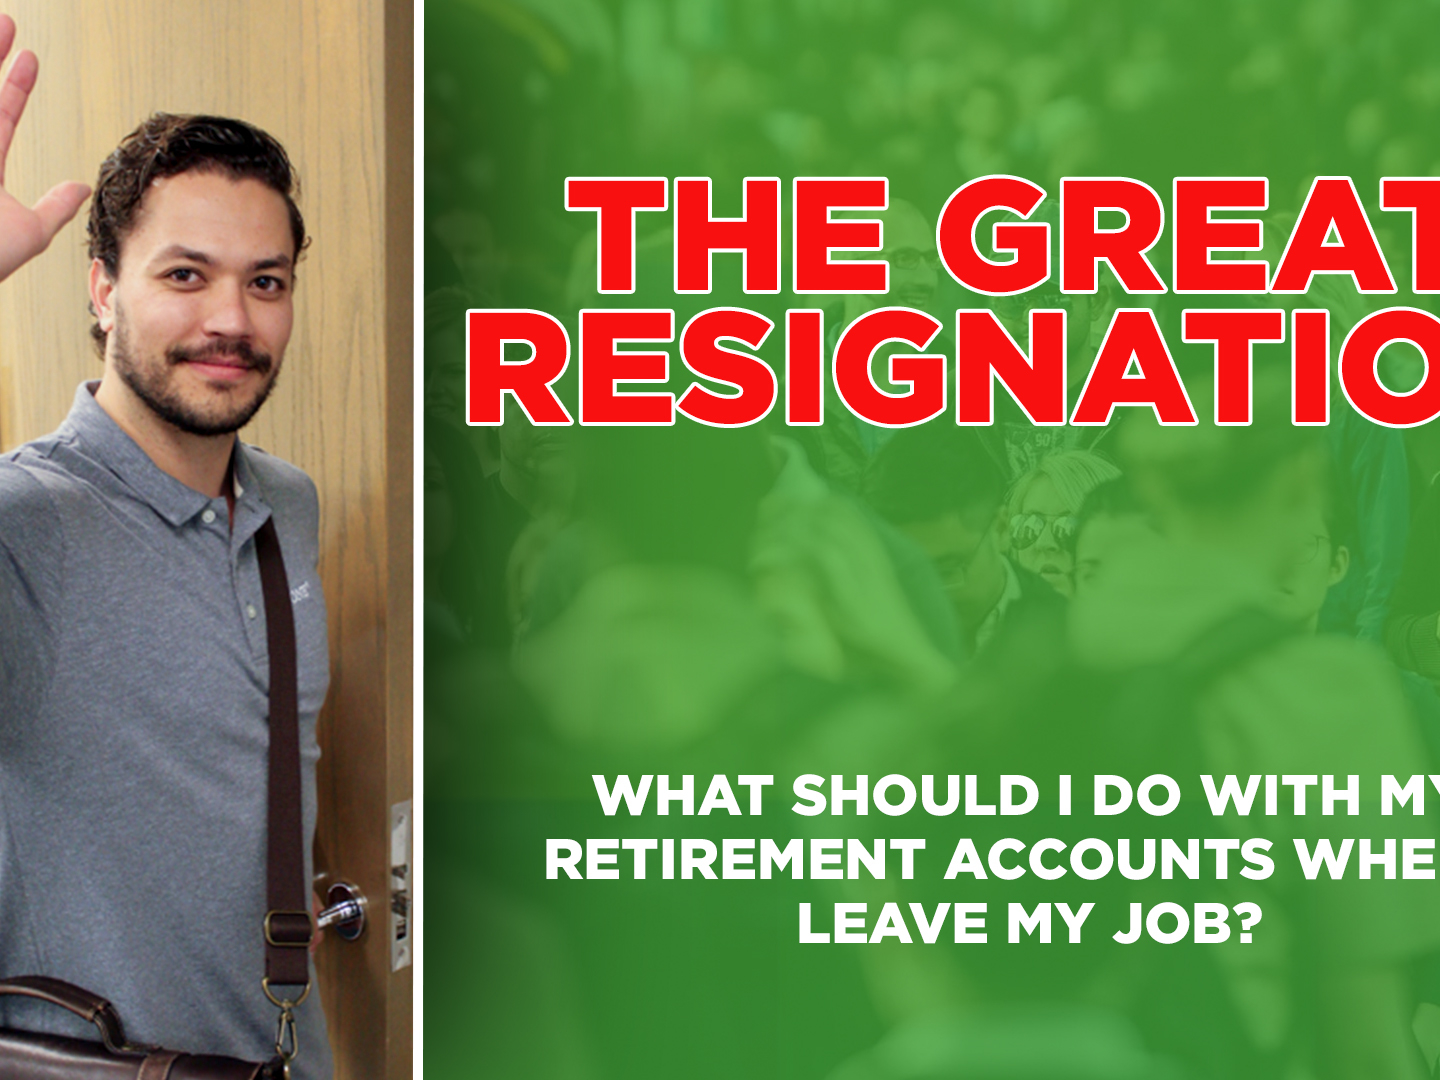 Resigning From a Job? 4 Options For Your Retirement Account